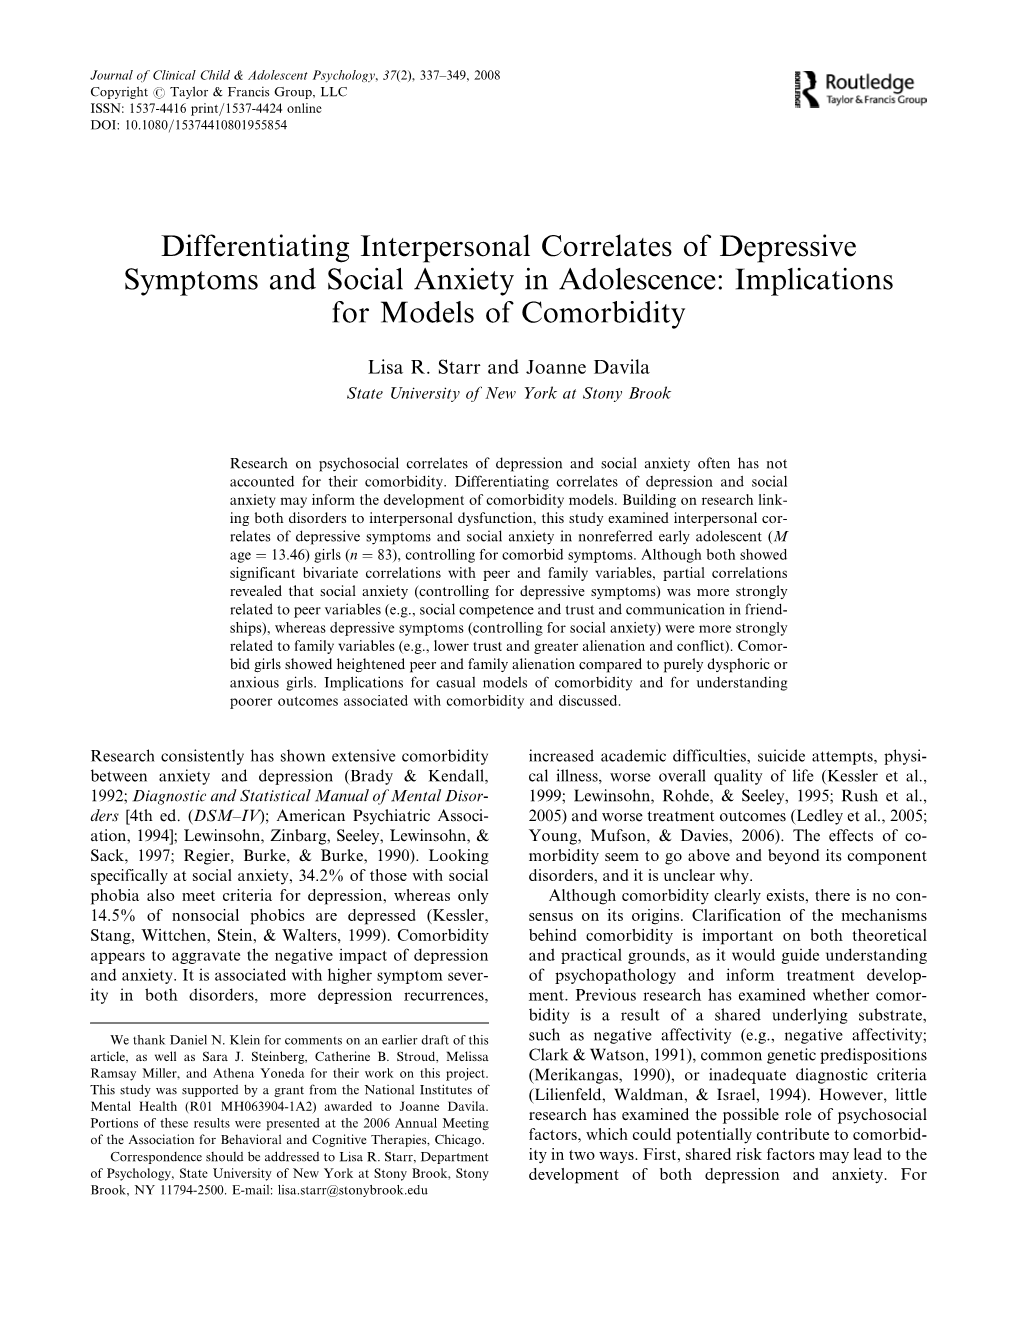 Differentiating Interpersonal Correlates of Depressive Symptoms and Social Anxiety in Adolescence: Implications for Models of Comorbidity